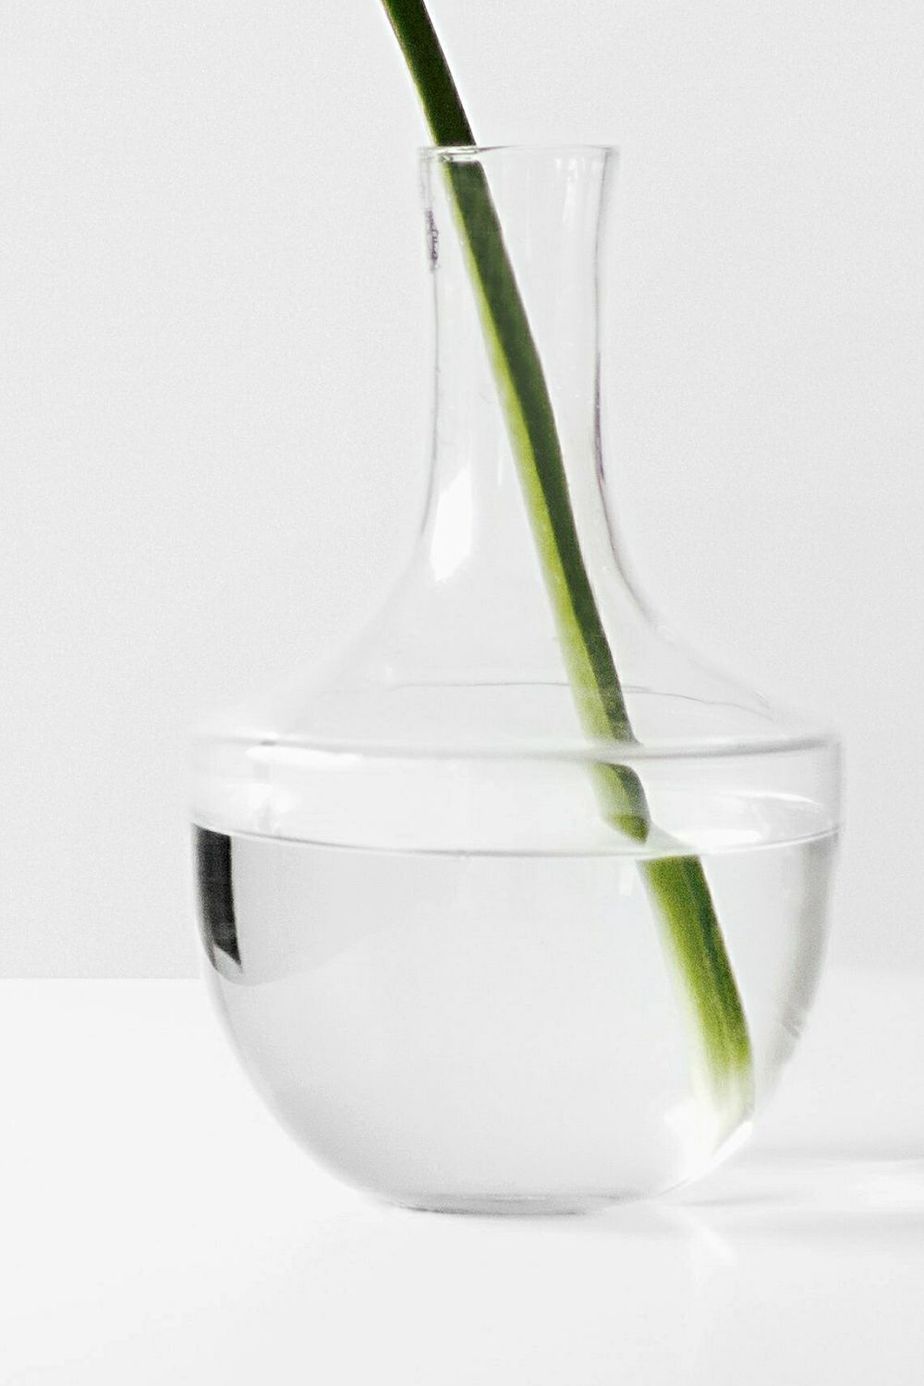 Place the new Philodendron Birkin stem cutting in the glass filled with water